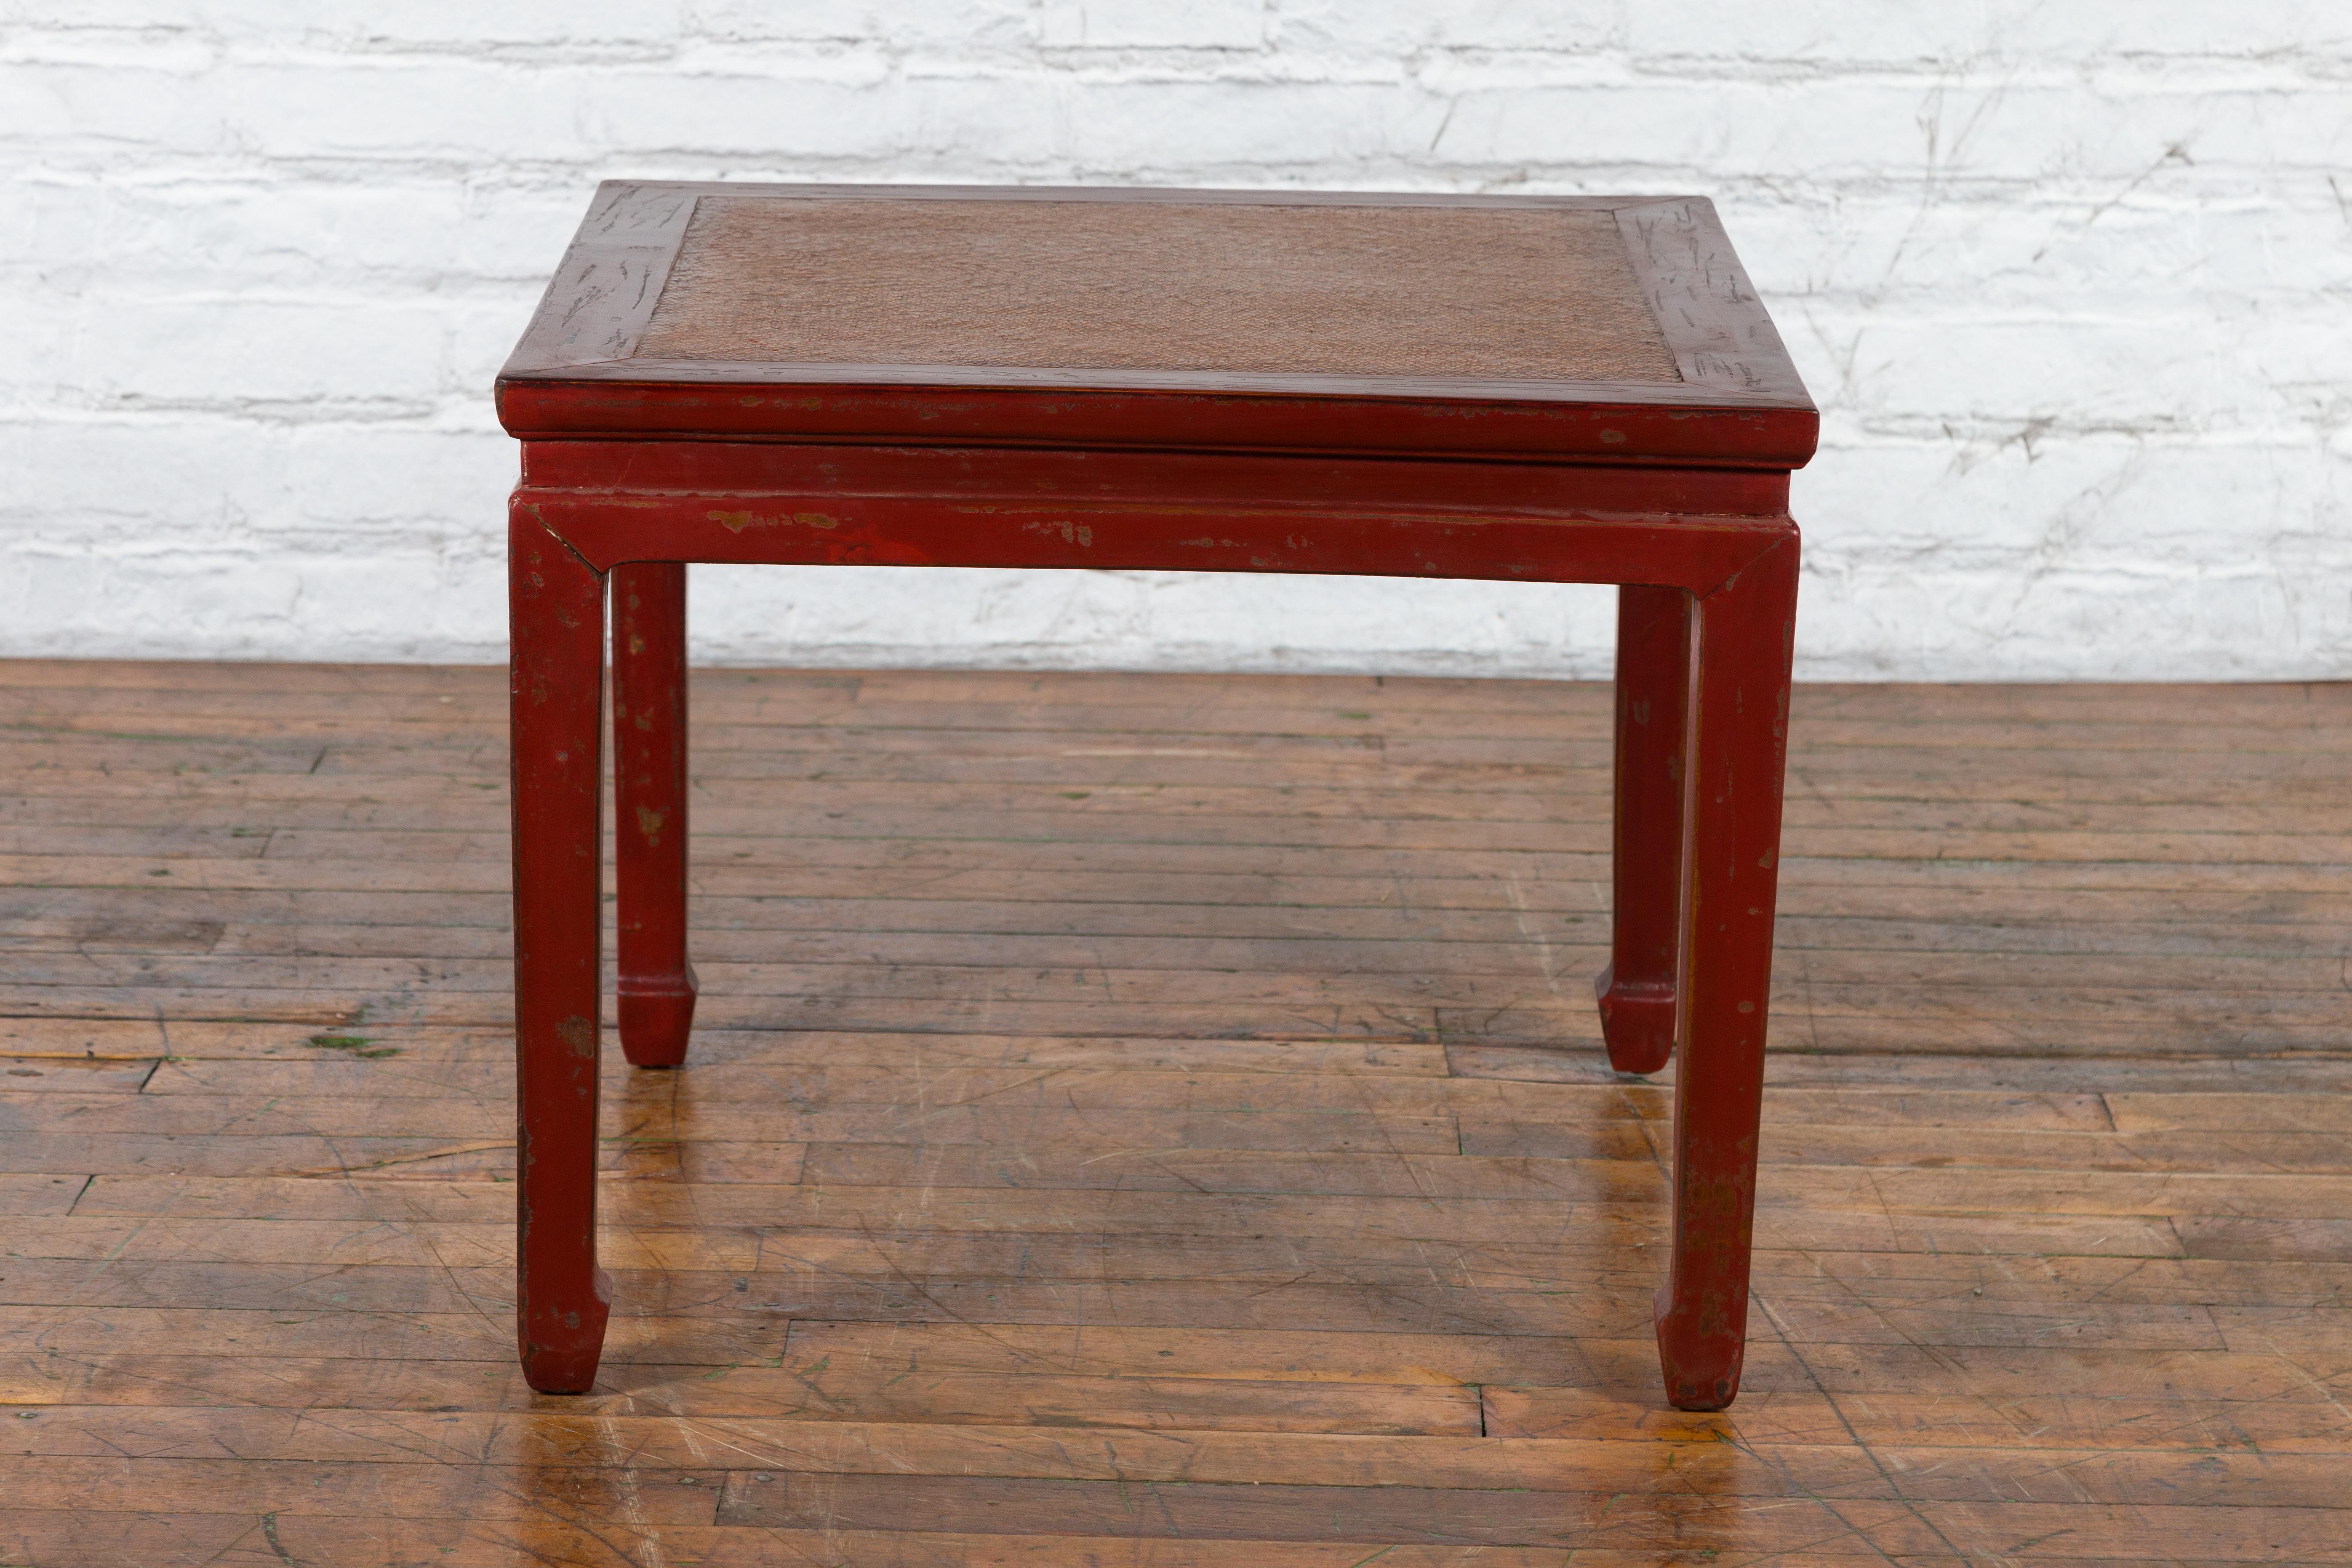 Chinese Qing Dynasty 19th Century Red Lacquer Side Table with Woven Rattan Top For Sale 13